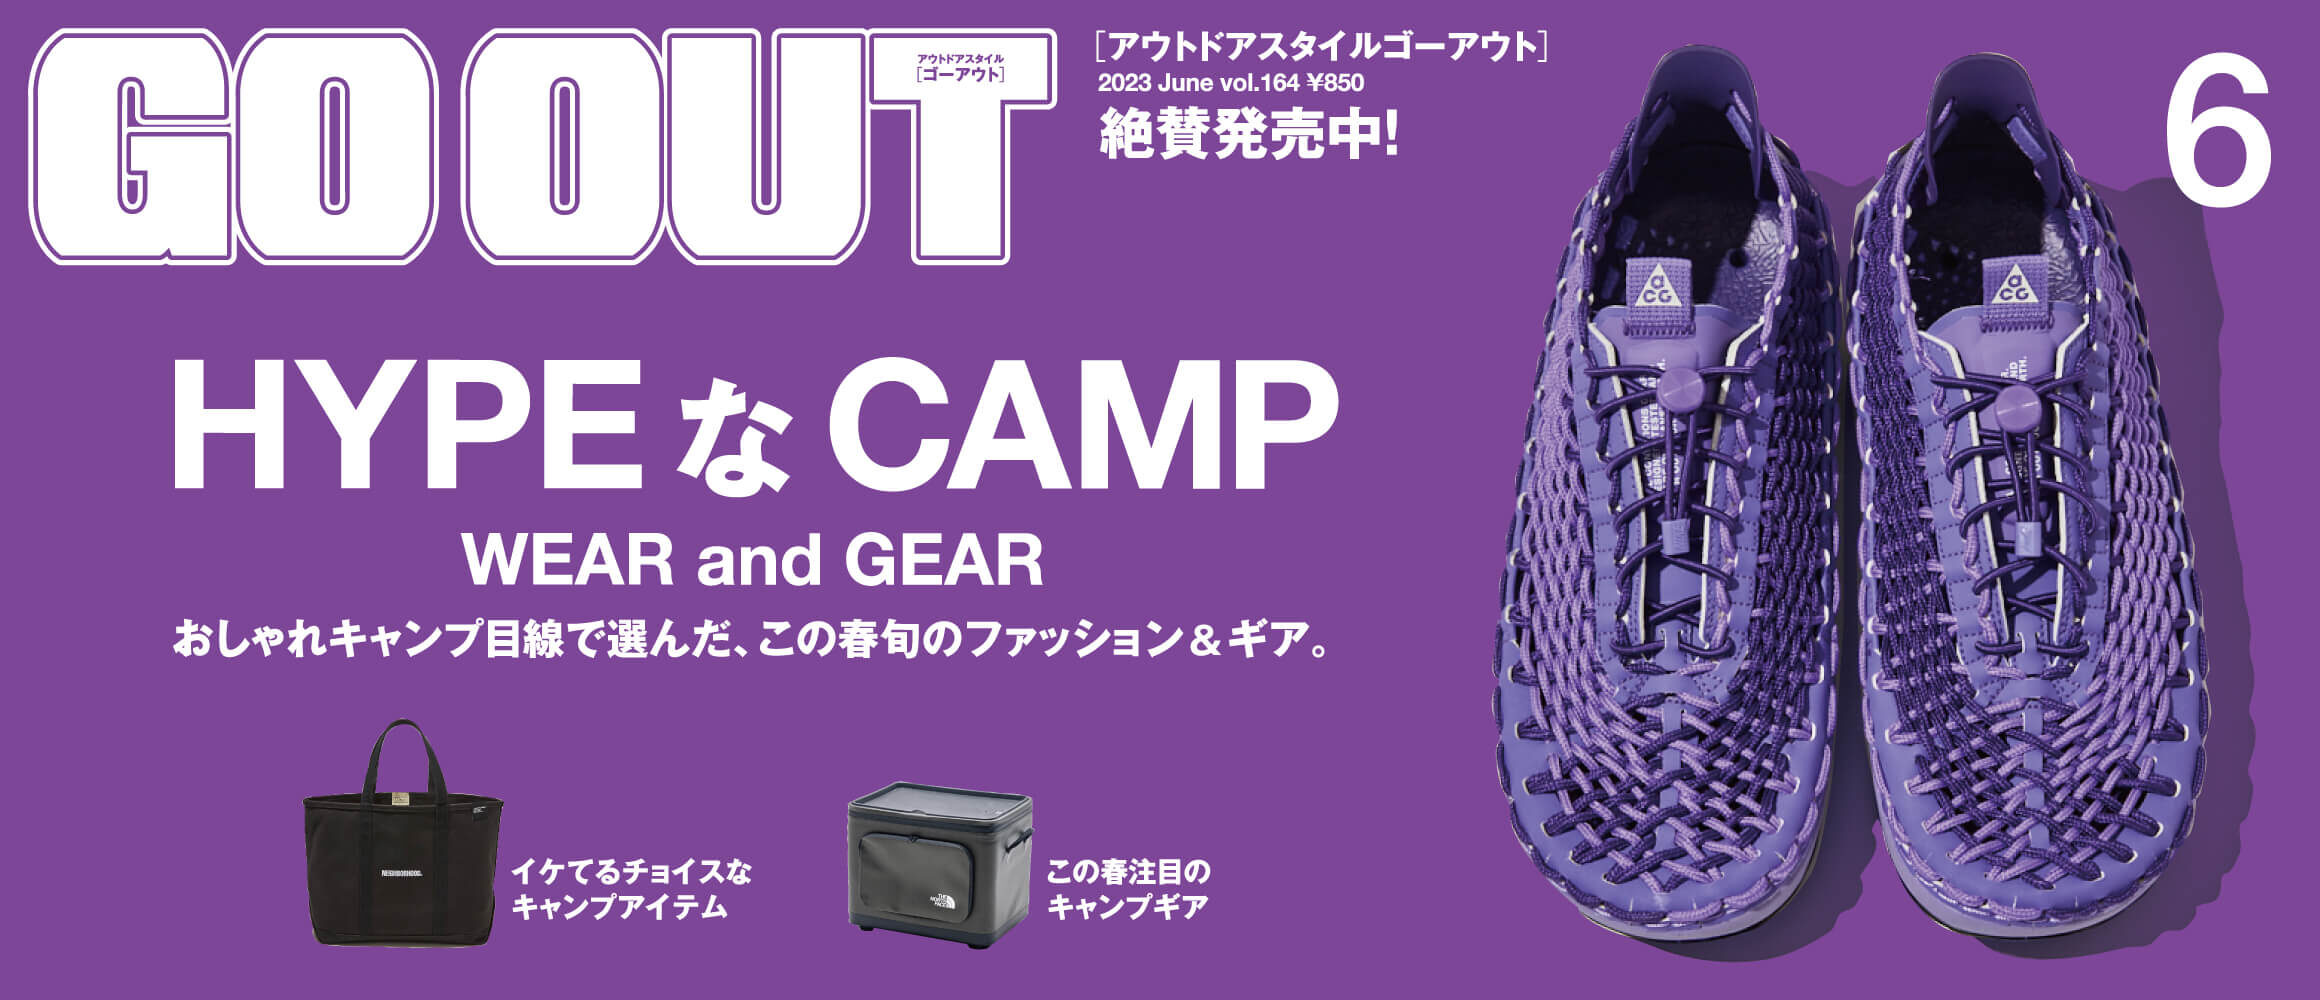 GO OUT最新号は、おしゃれキャンプ目線で選んだ「HYPE な CAMP　WEAR and GEAR」。